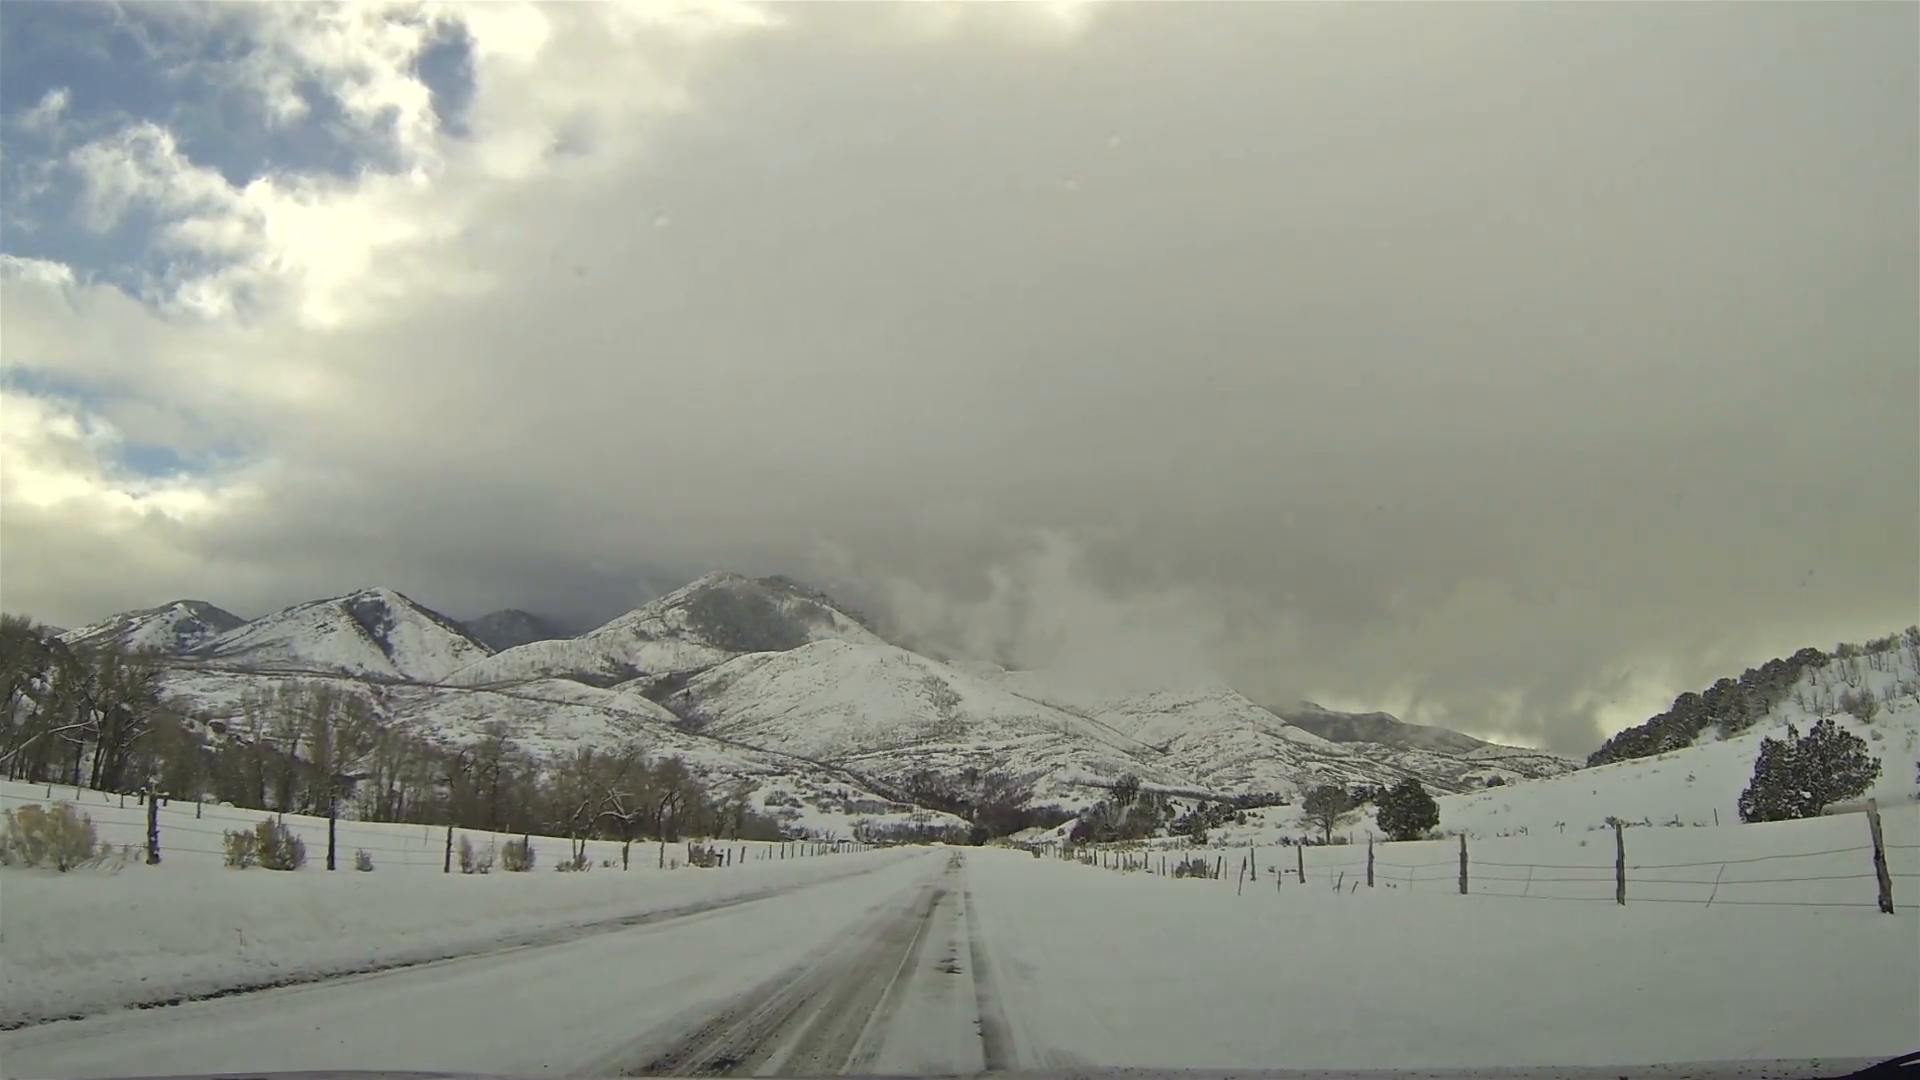 Winter snowy and cloudy day mountain road. Driving a car on rural ...